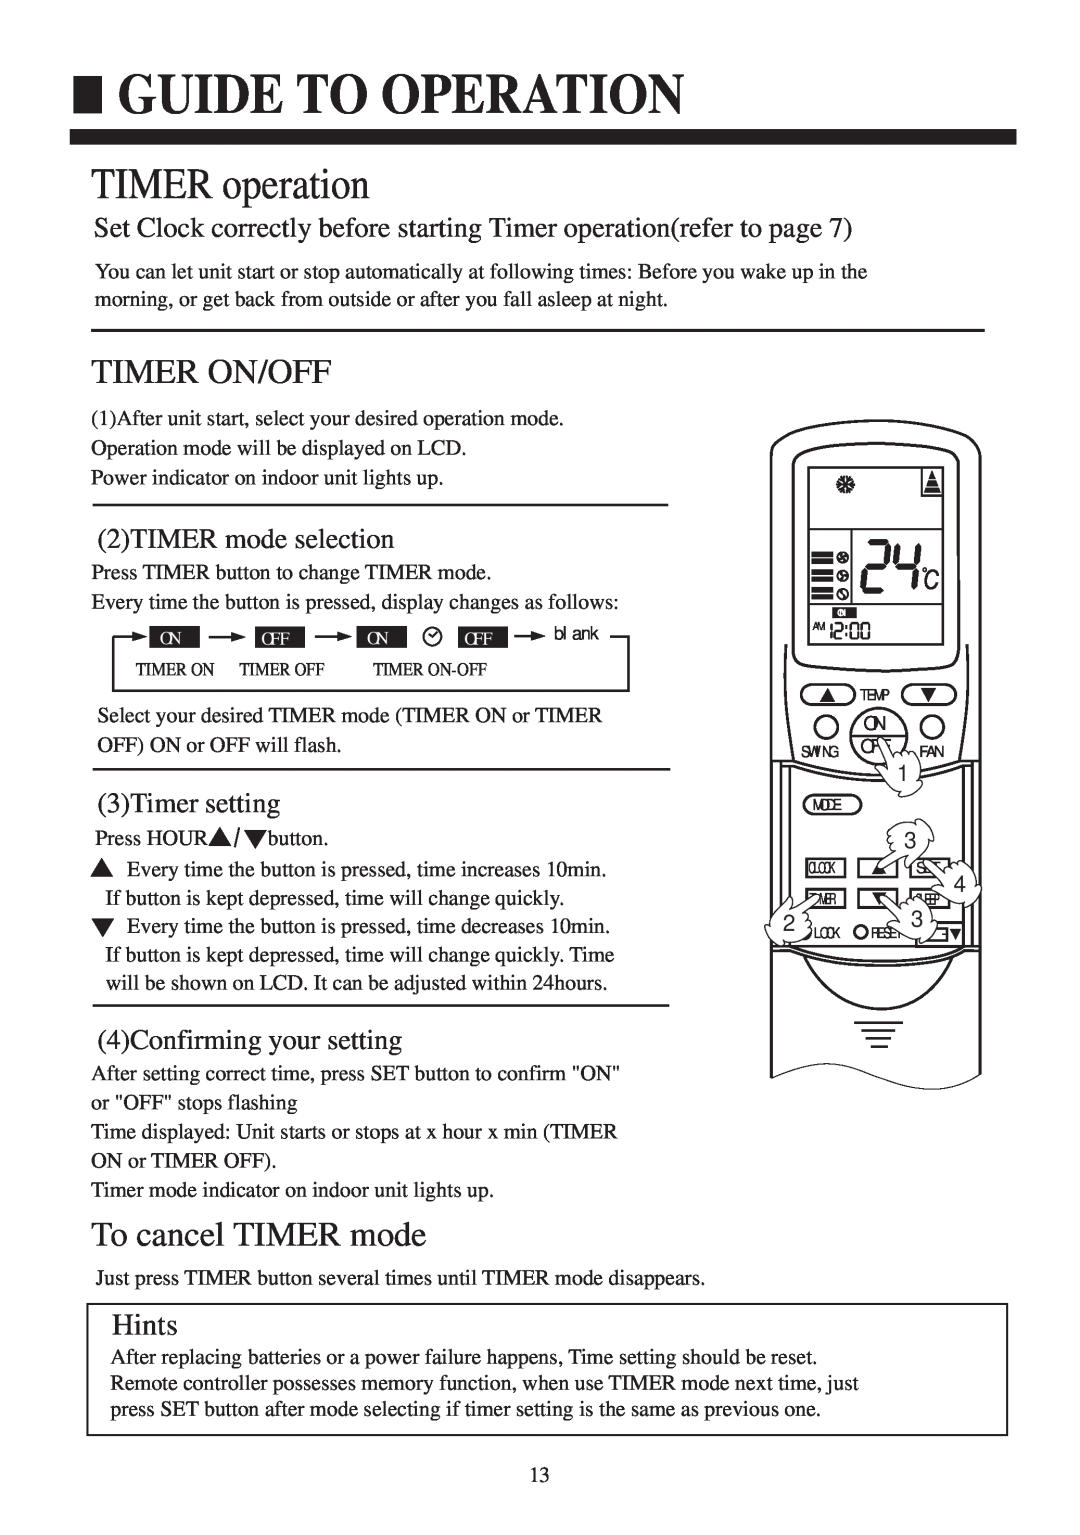 Haier HCFU-28C13 TIMER operation, Timer On/Off, To cancel TIMER mode, 2TIMER mode selection, 3Timer setting, Hints 